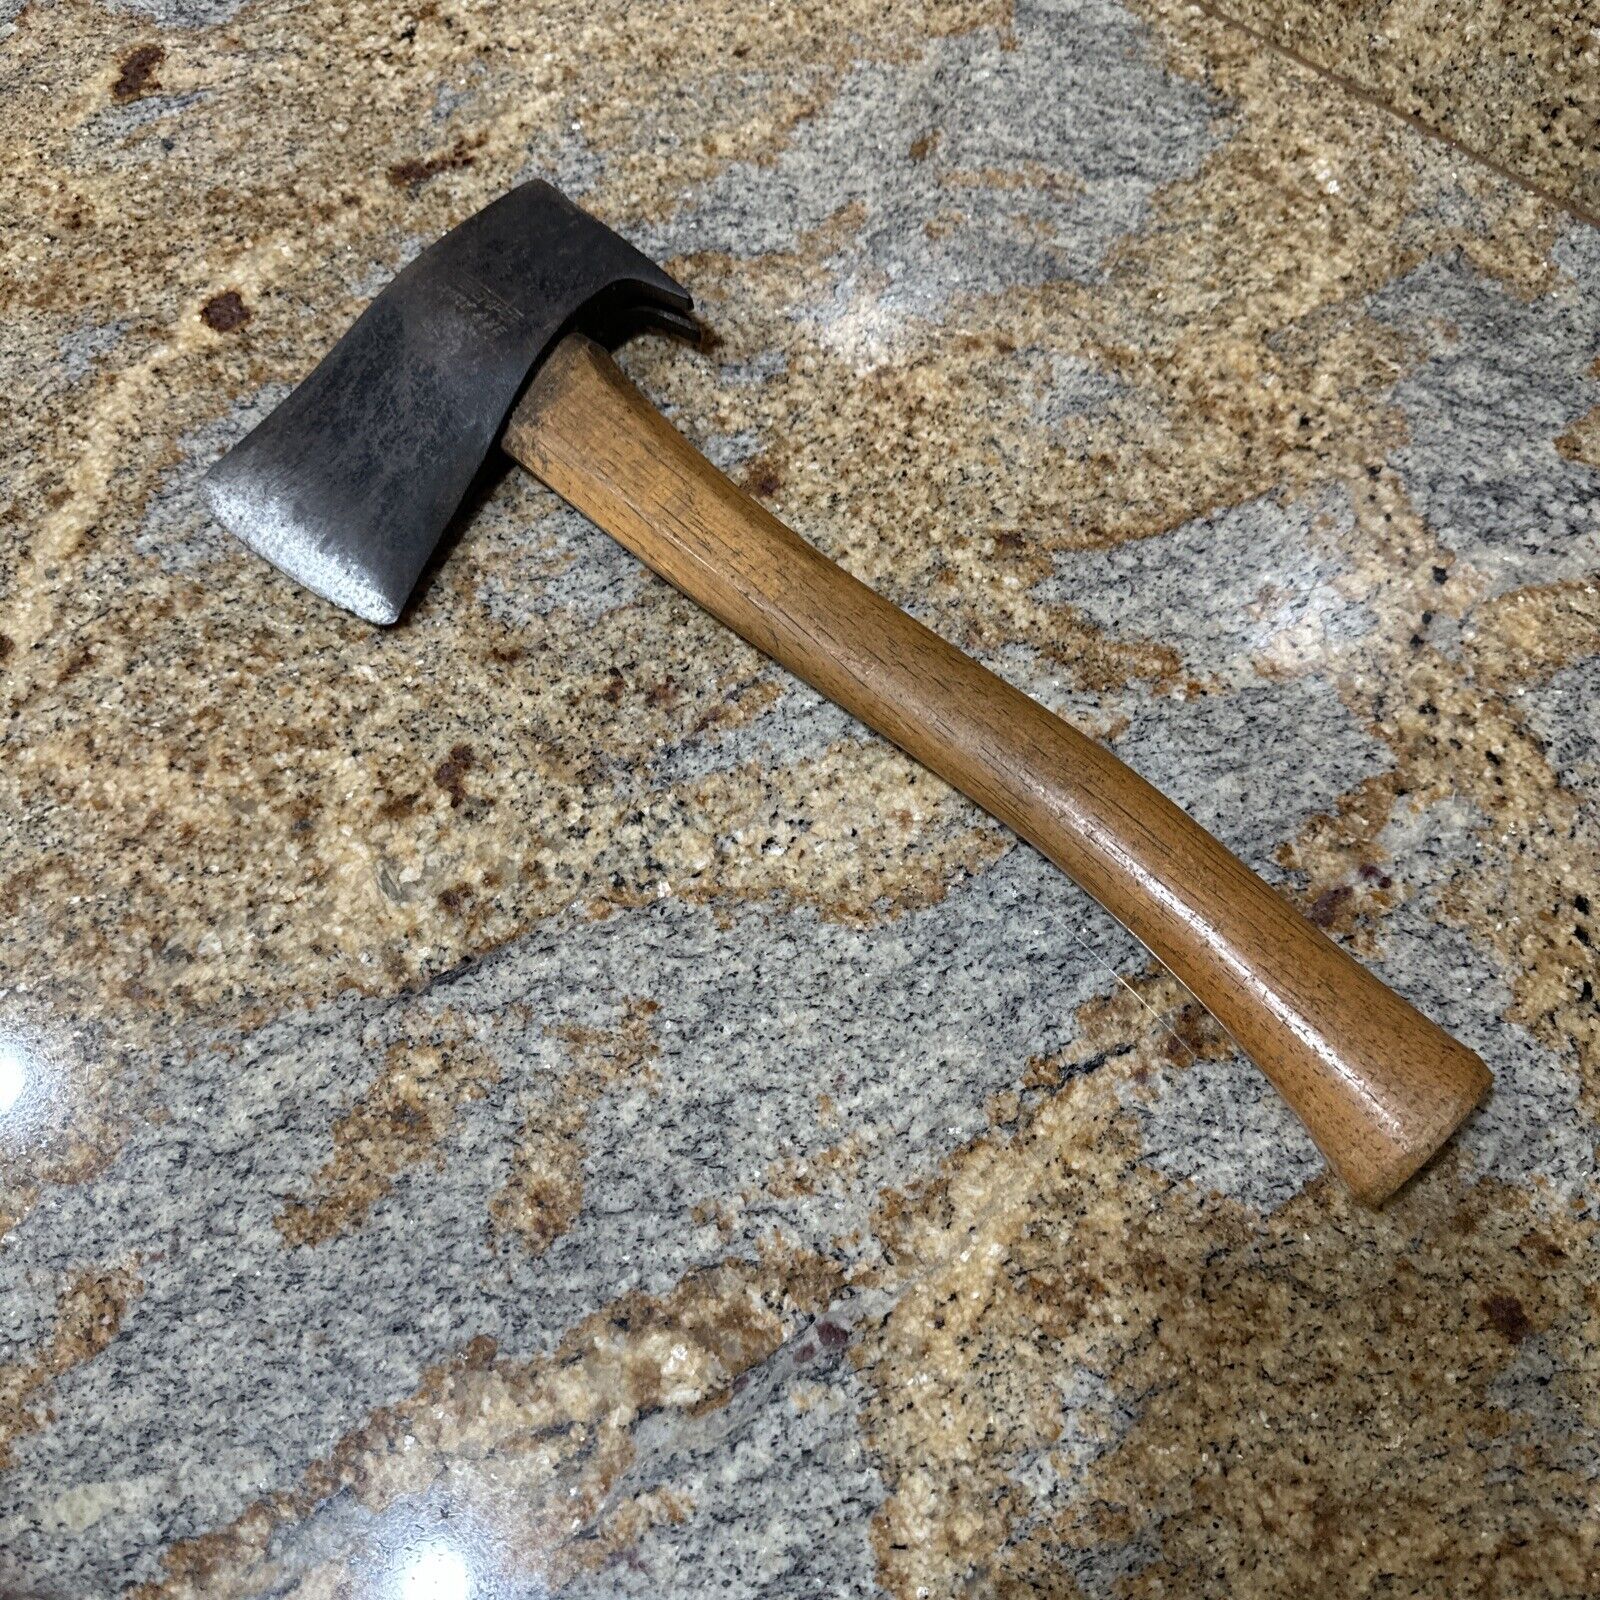 VINTAGE TRUE TEMPER TOMMY AXE SINGLE BIT AXE HATCHET HEAD WITH NAIL PULLER -NICE